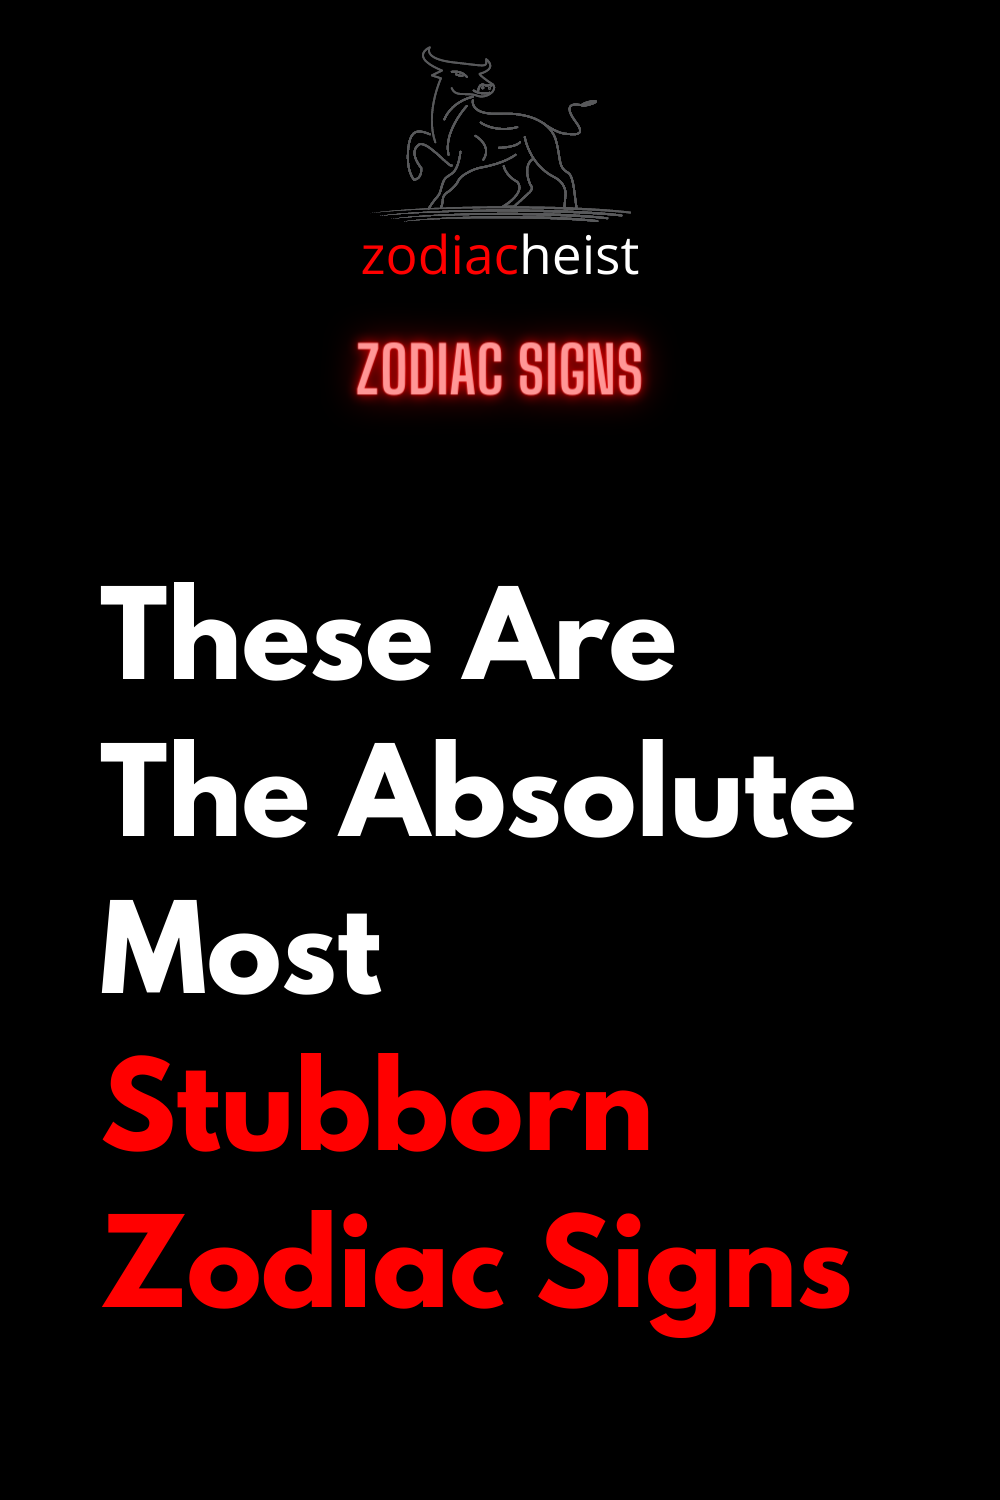 These Are The Absolute Most Stubborn Zodiac Signs